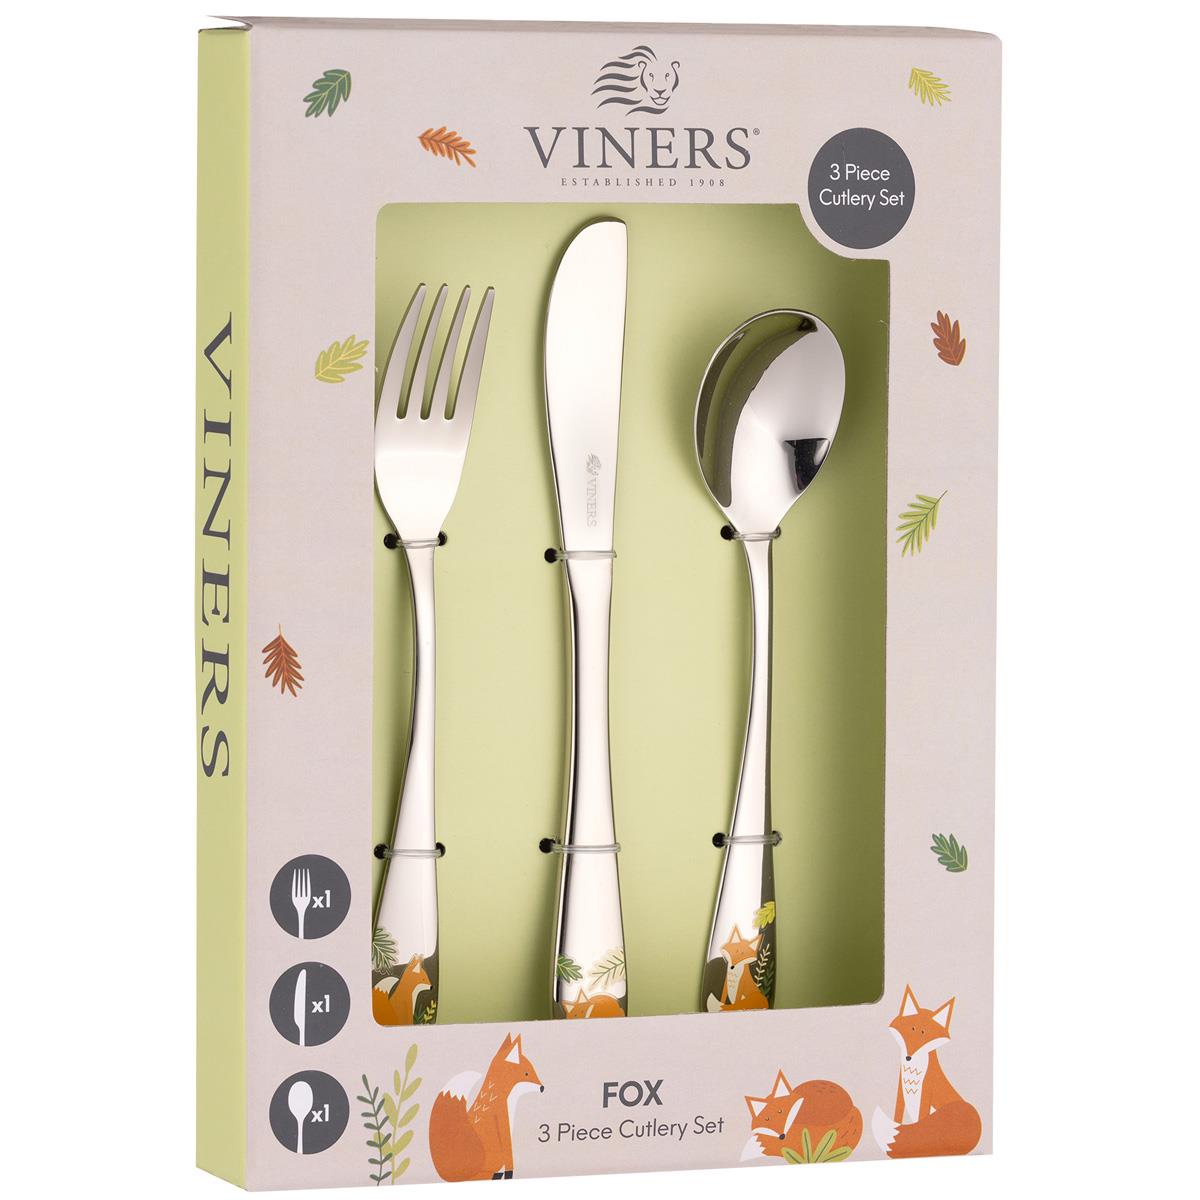 Viners Fox 3 Piece Kids Cutlery Set 0304.021 Questions & Answers